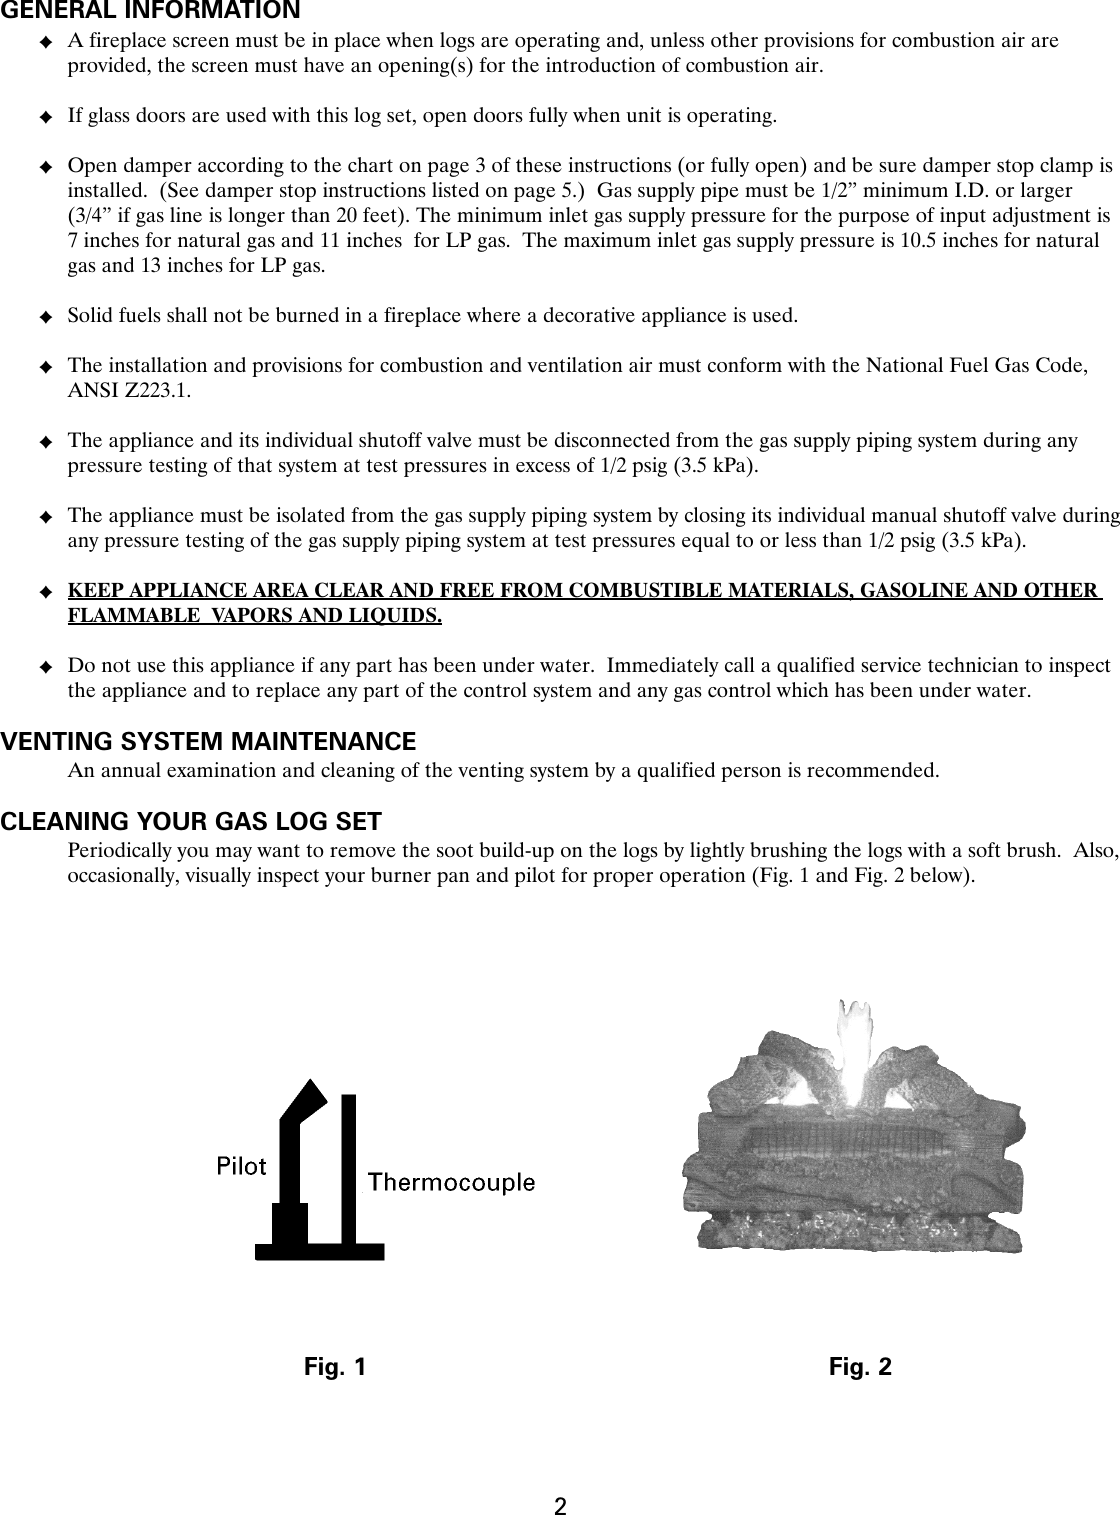 Page 2 of 11 - Heatmaster Heatmaster-Gas-Burner-Users-Manual- Hm142000  Heatmaster-gas-burner-users-manual